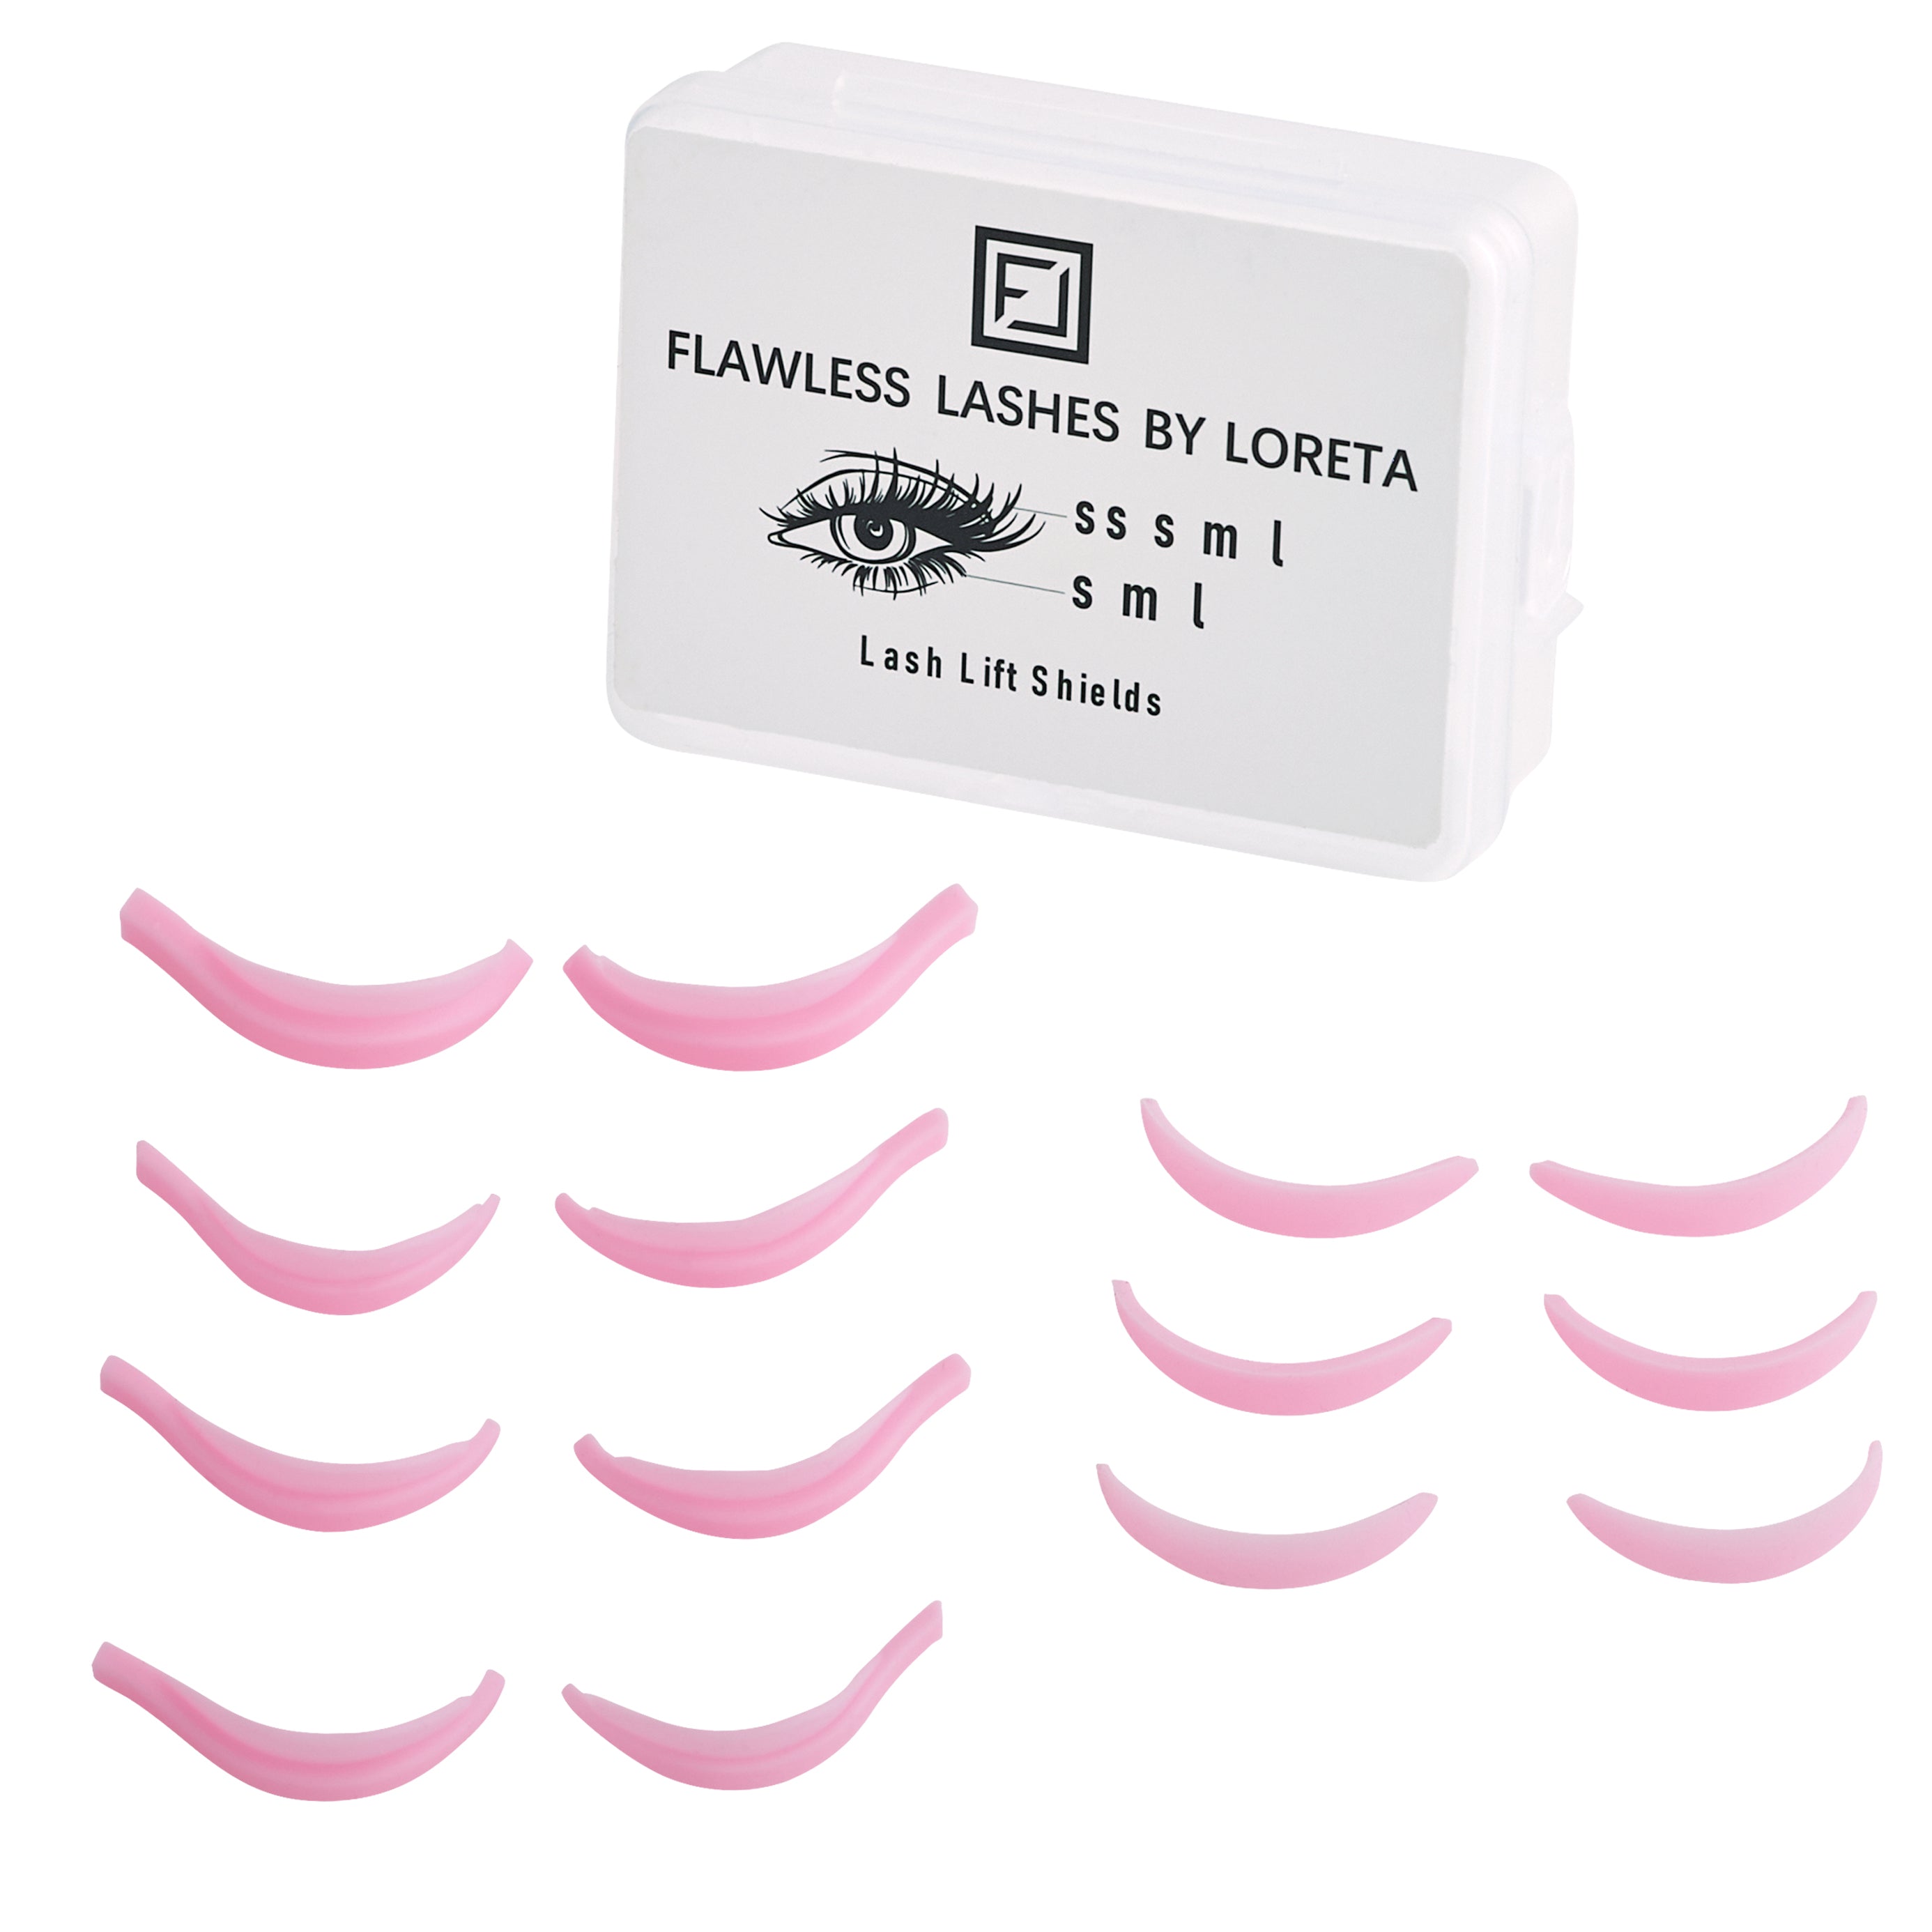 Silikon Pads by Ana Ceni Mix Box in Pink Glitzer für das Wimpernlifting –  EasyLift Pro